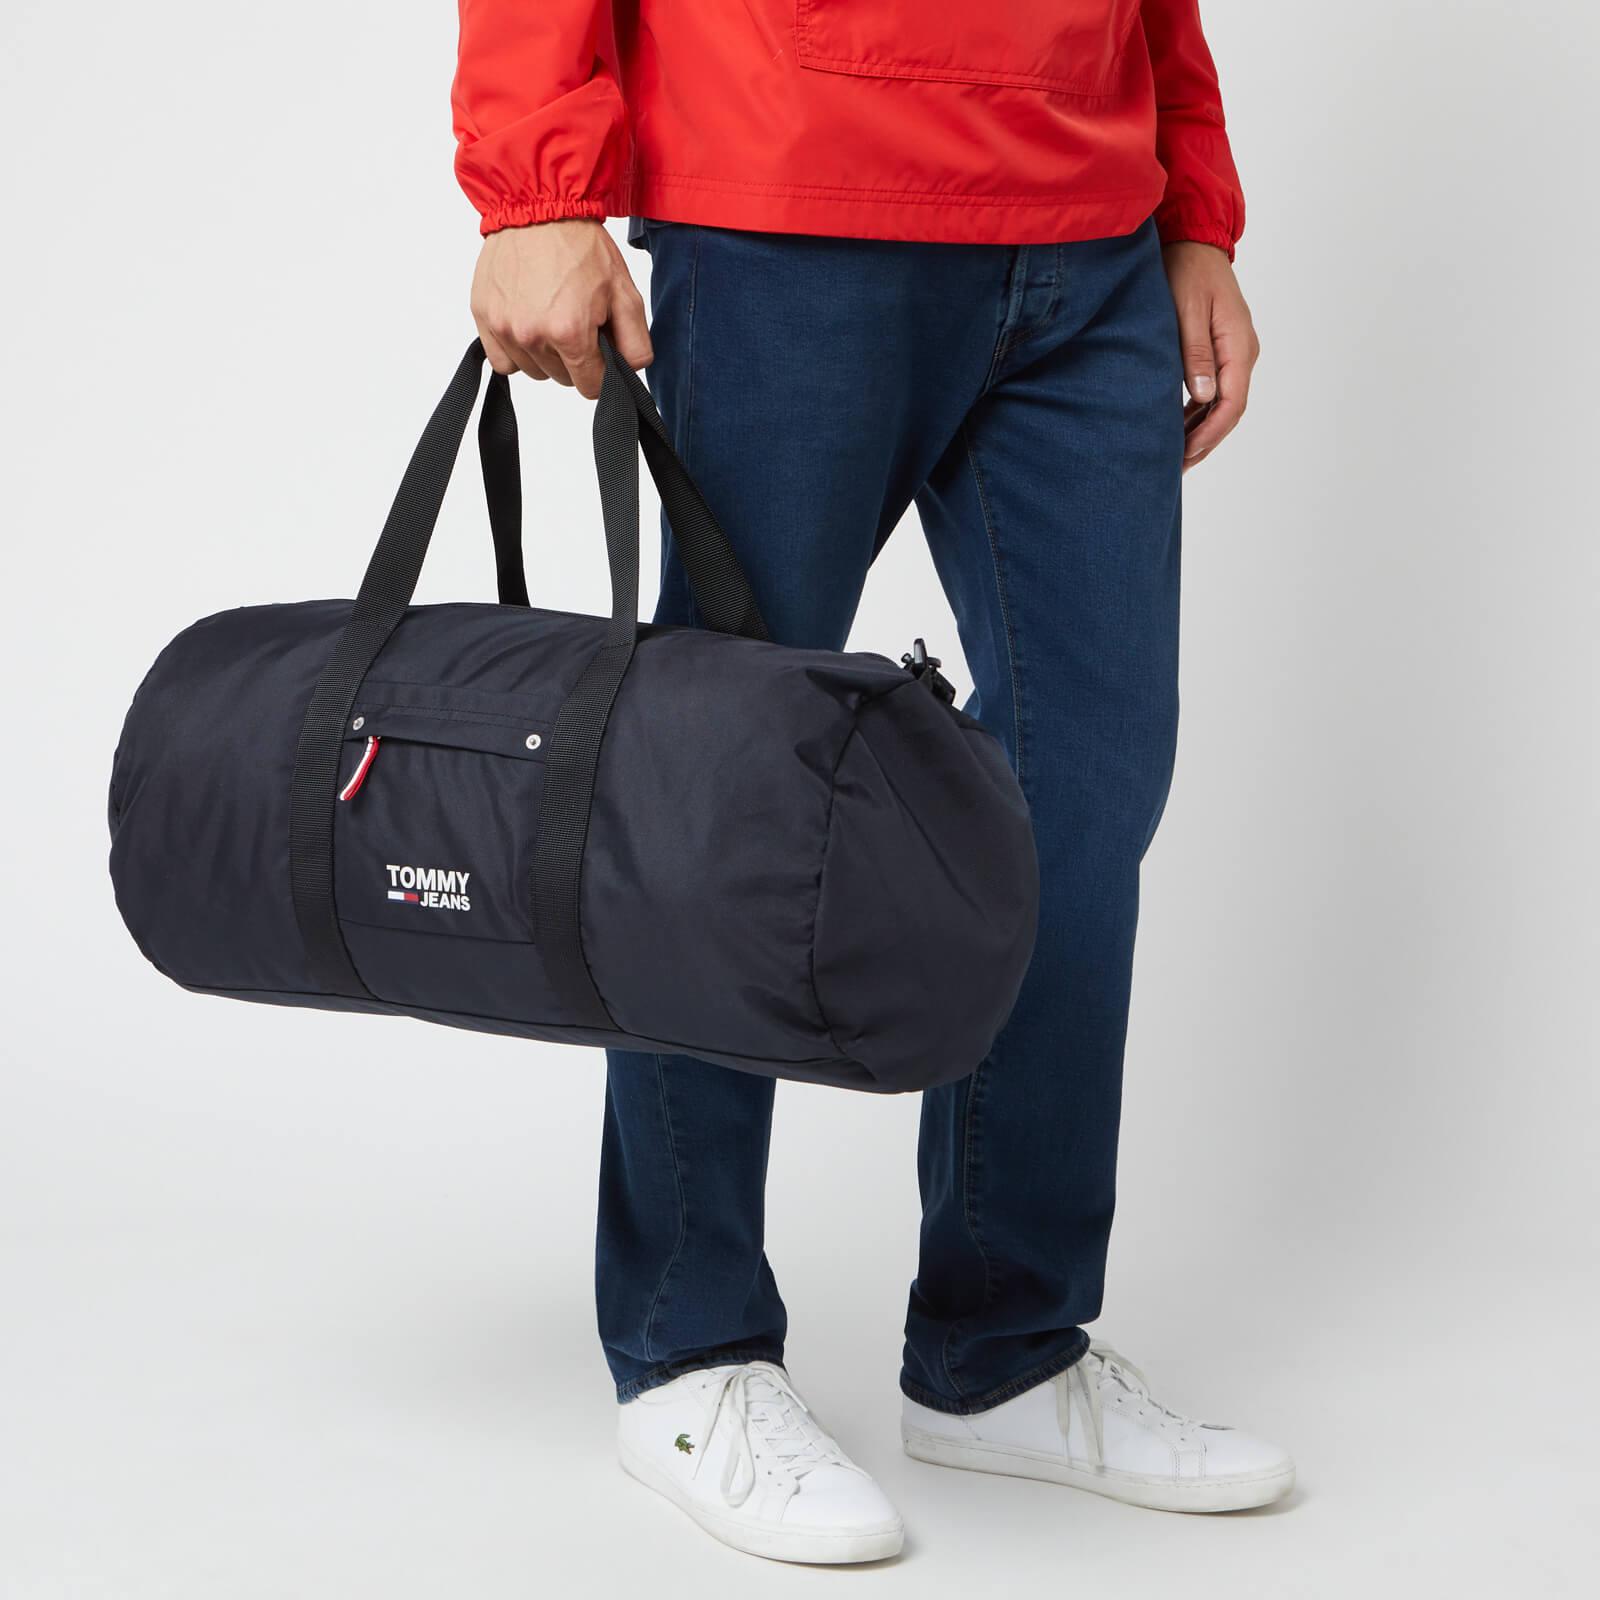 Tommy Hilfiger Cool City Duffle Bag in 